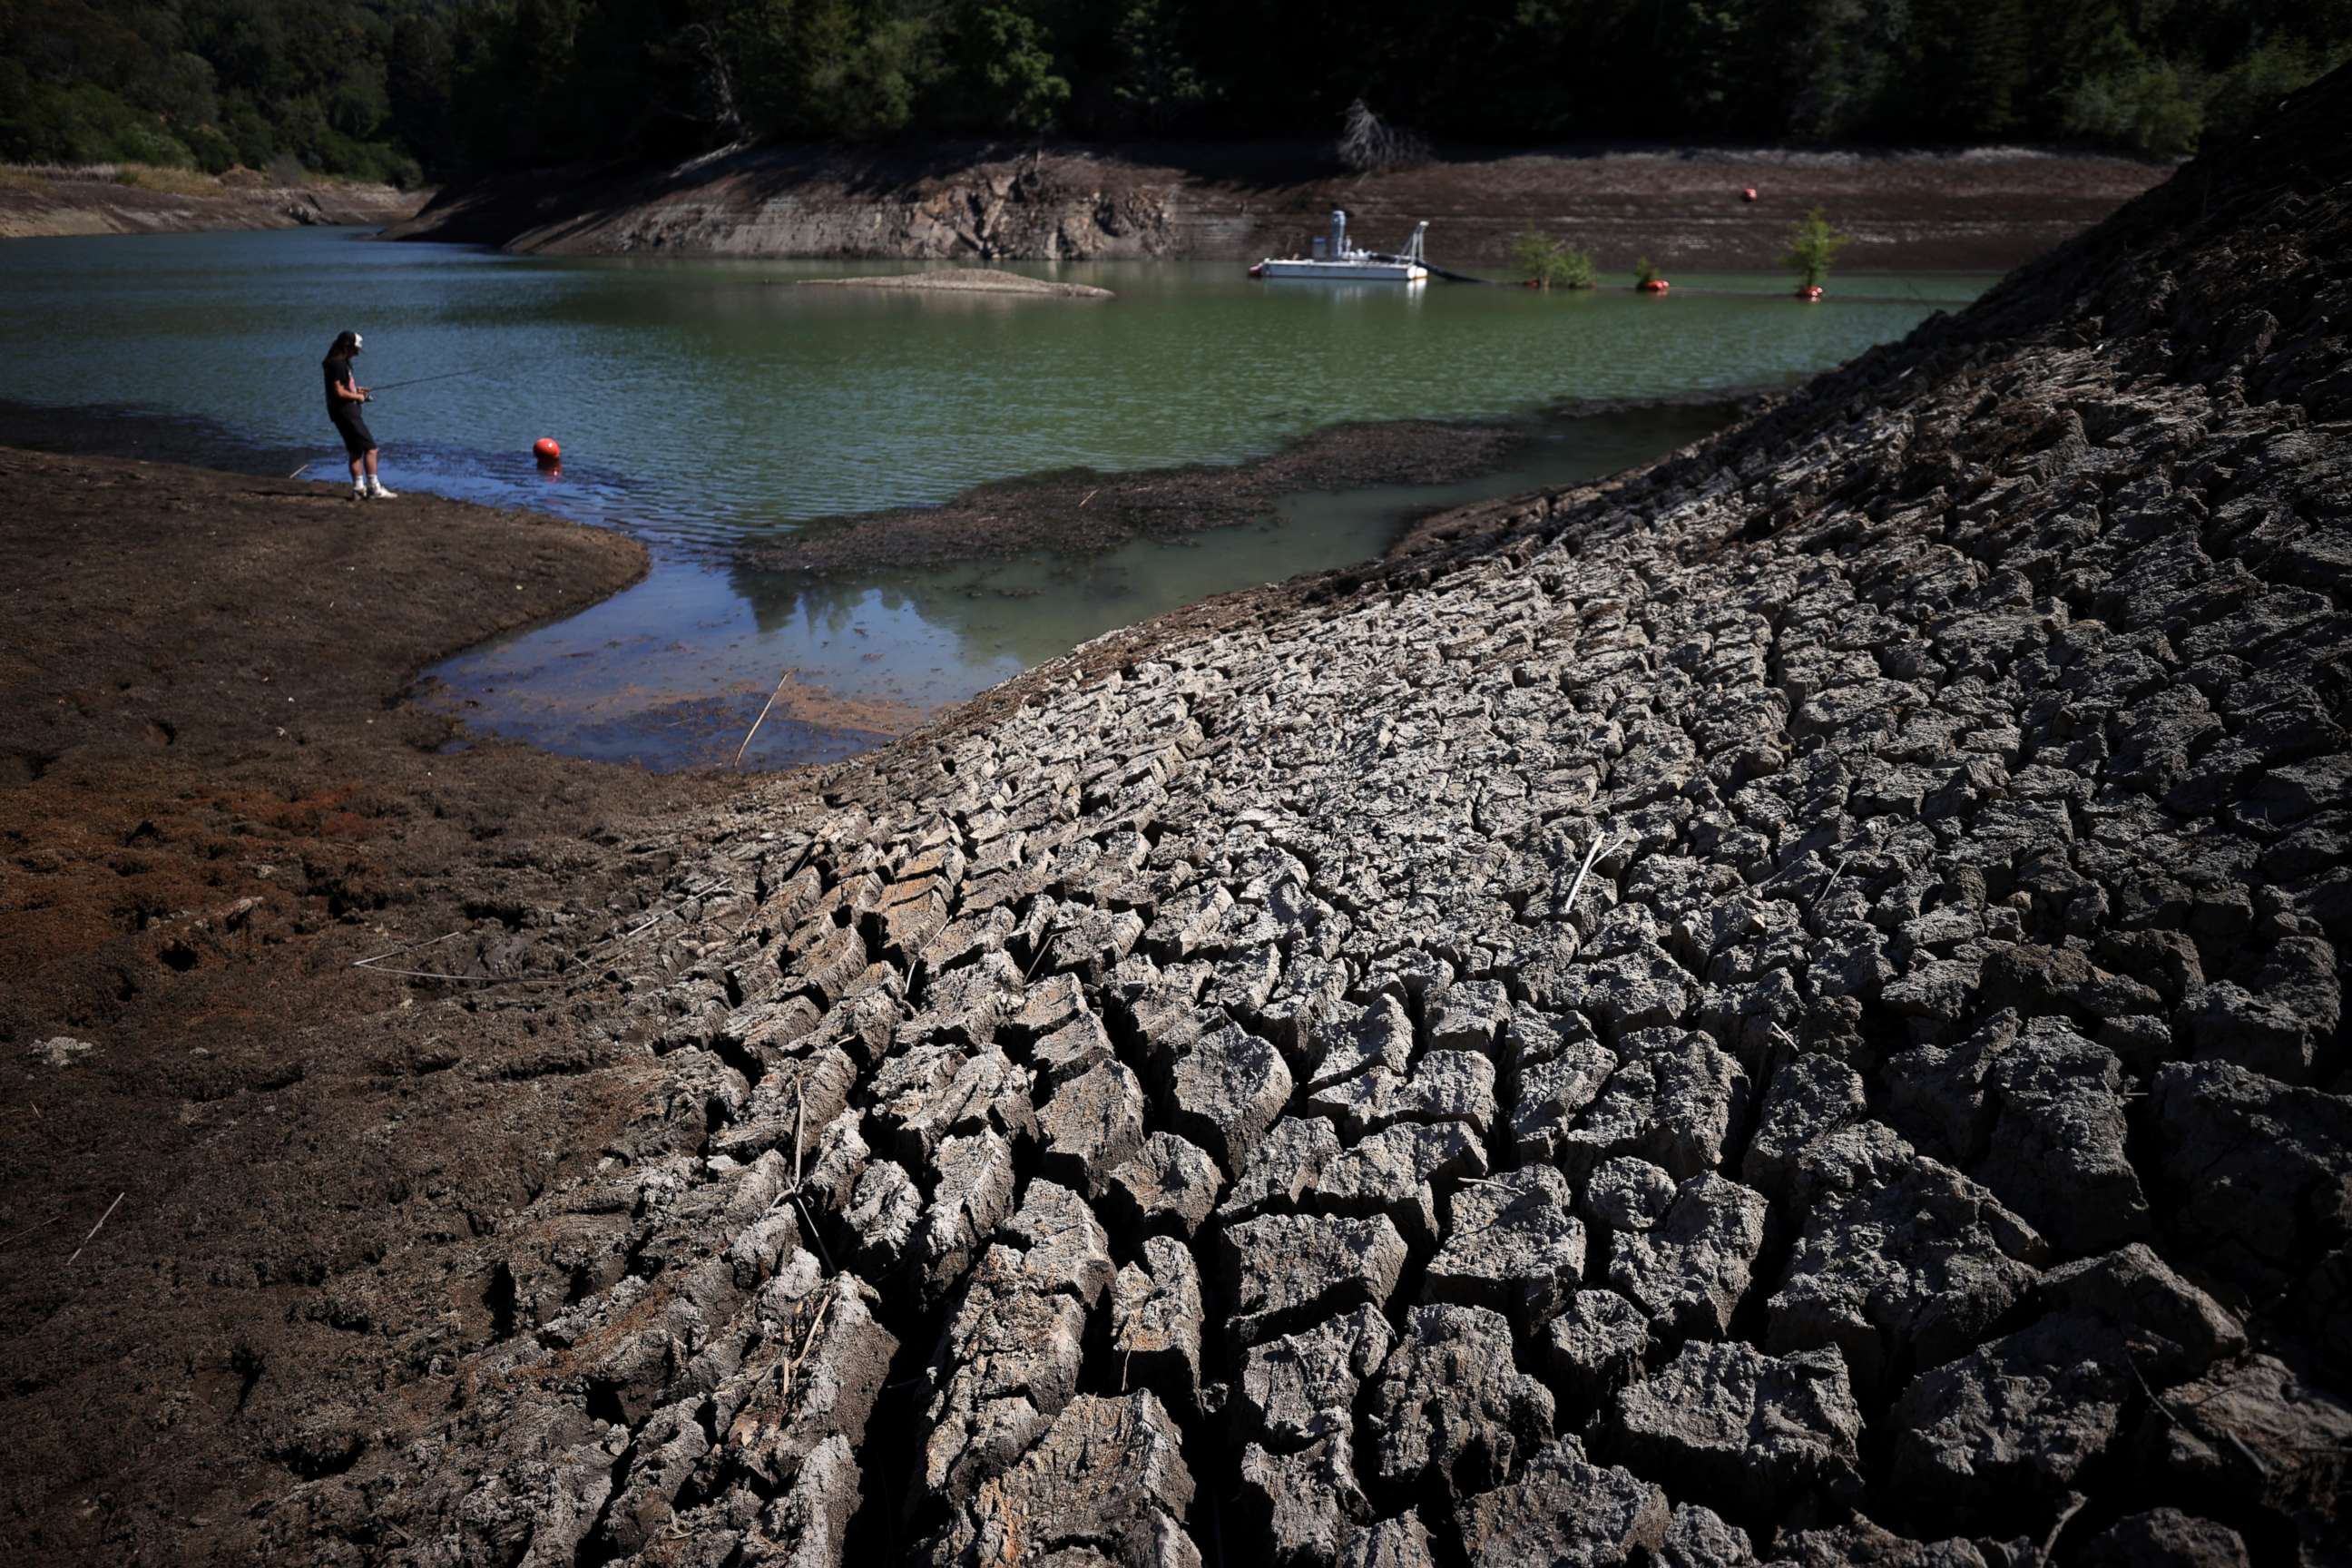 PHOTO: Dry cracked earth is visible along the banks of Phoenix Lake during a new drought emergency on April 21, 2021 in Ross, Calif.